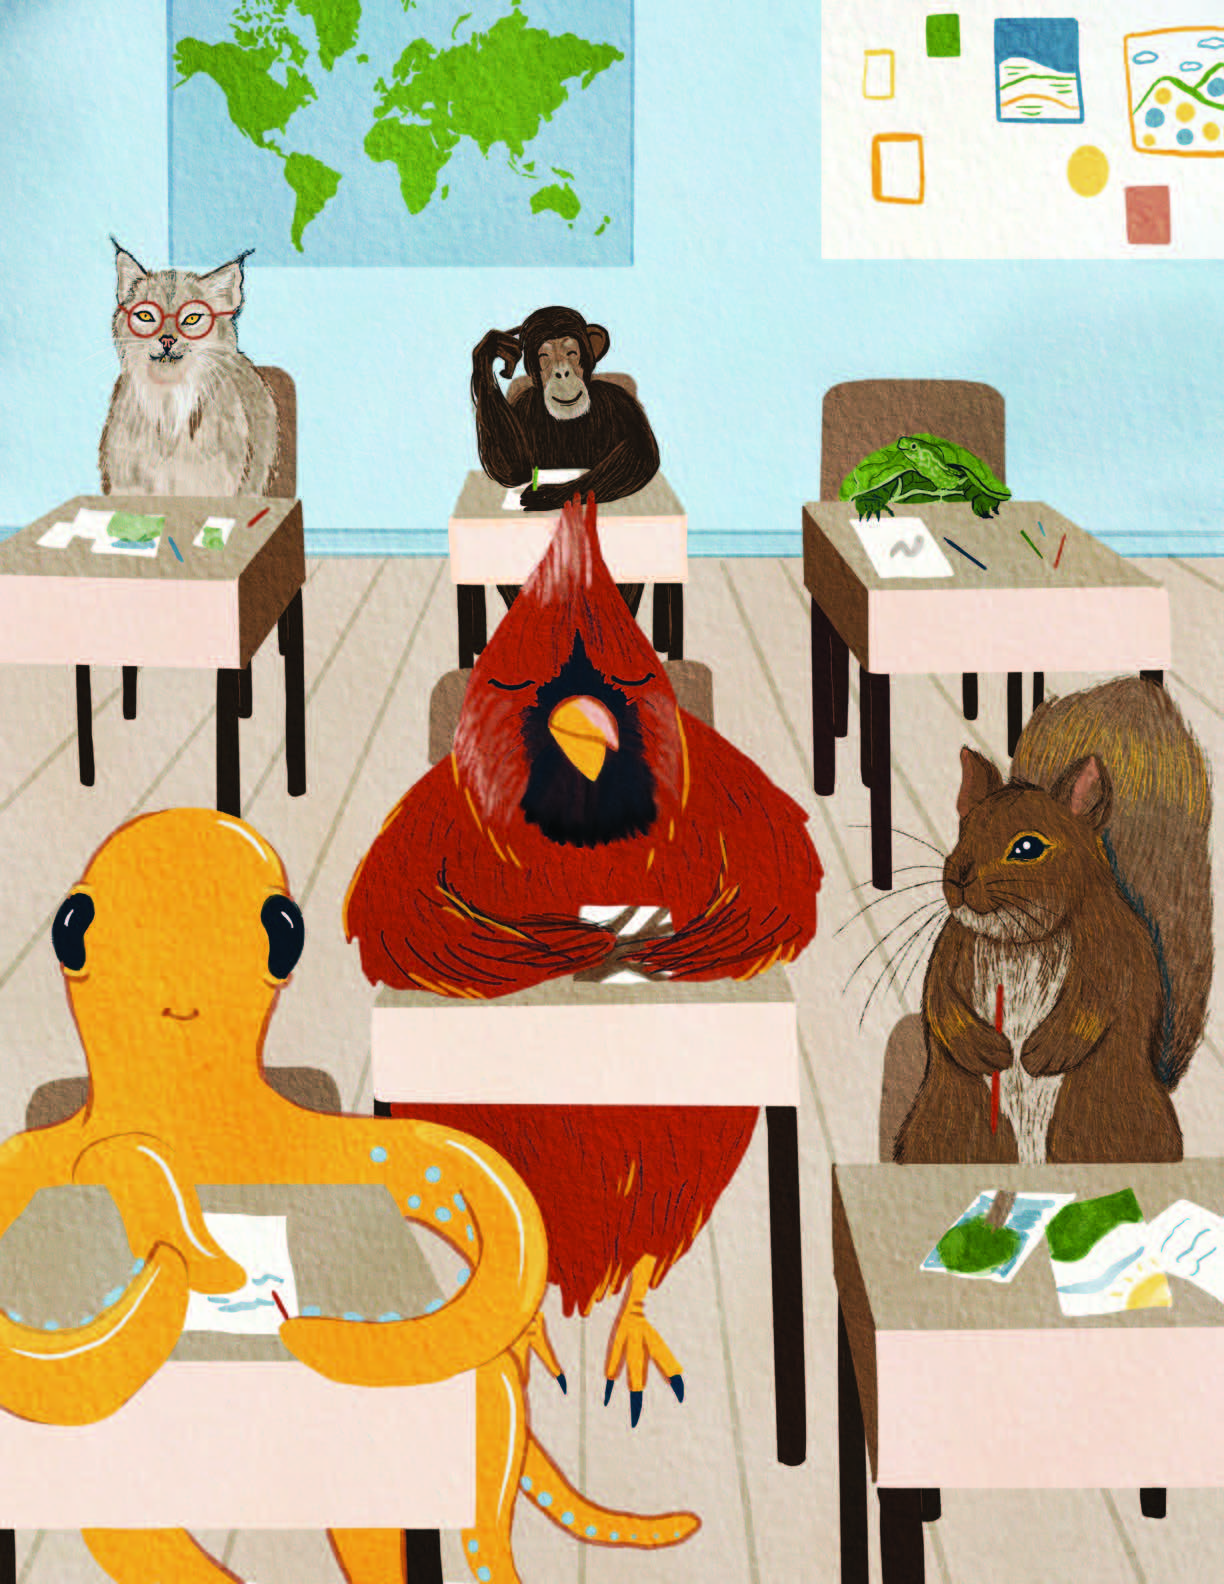 An illustration of animals sitting at desks in a classroom.